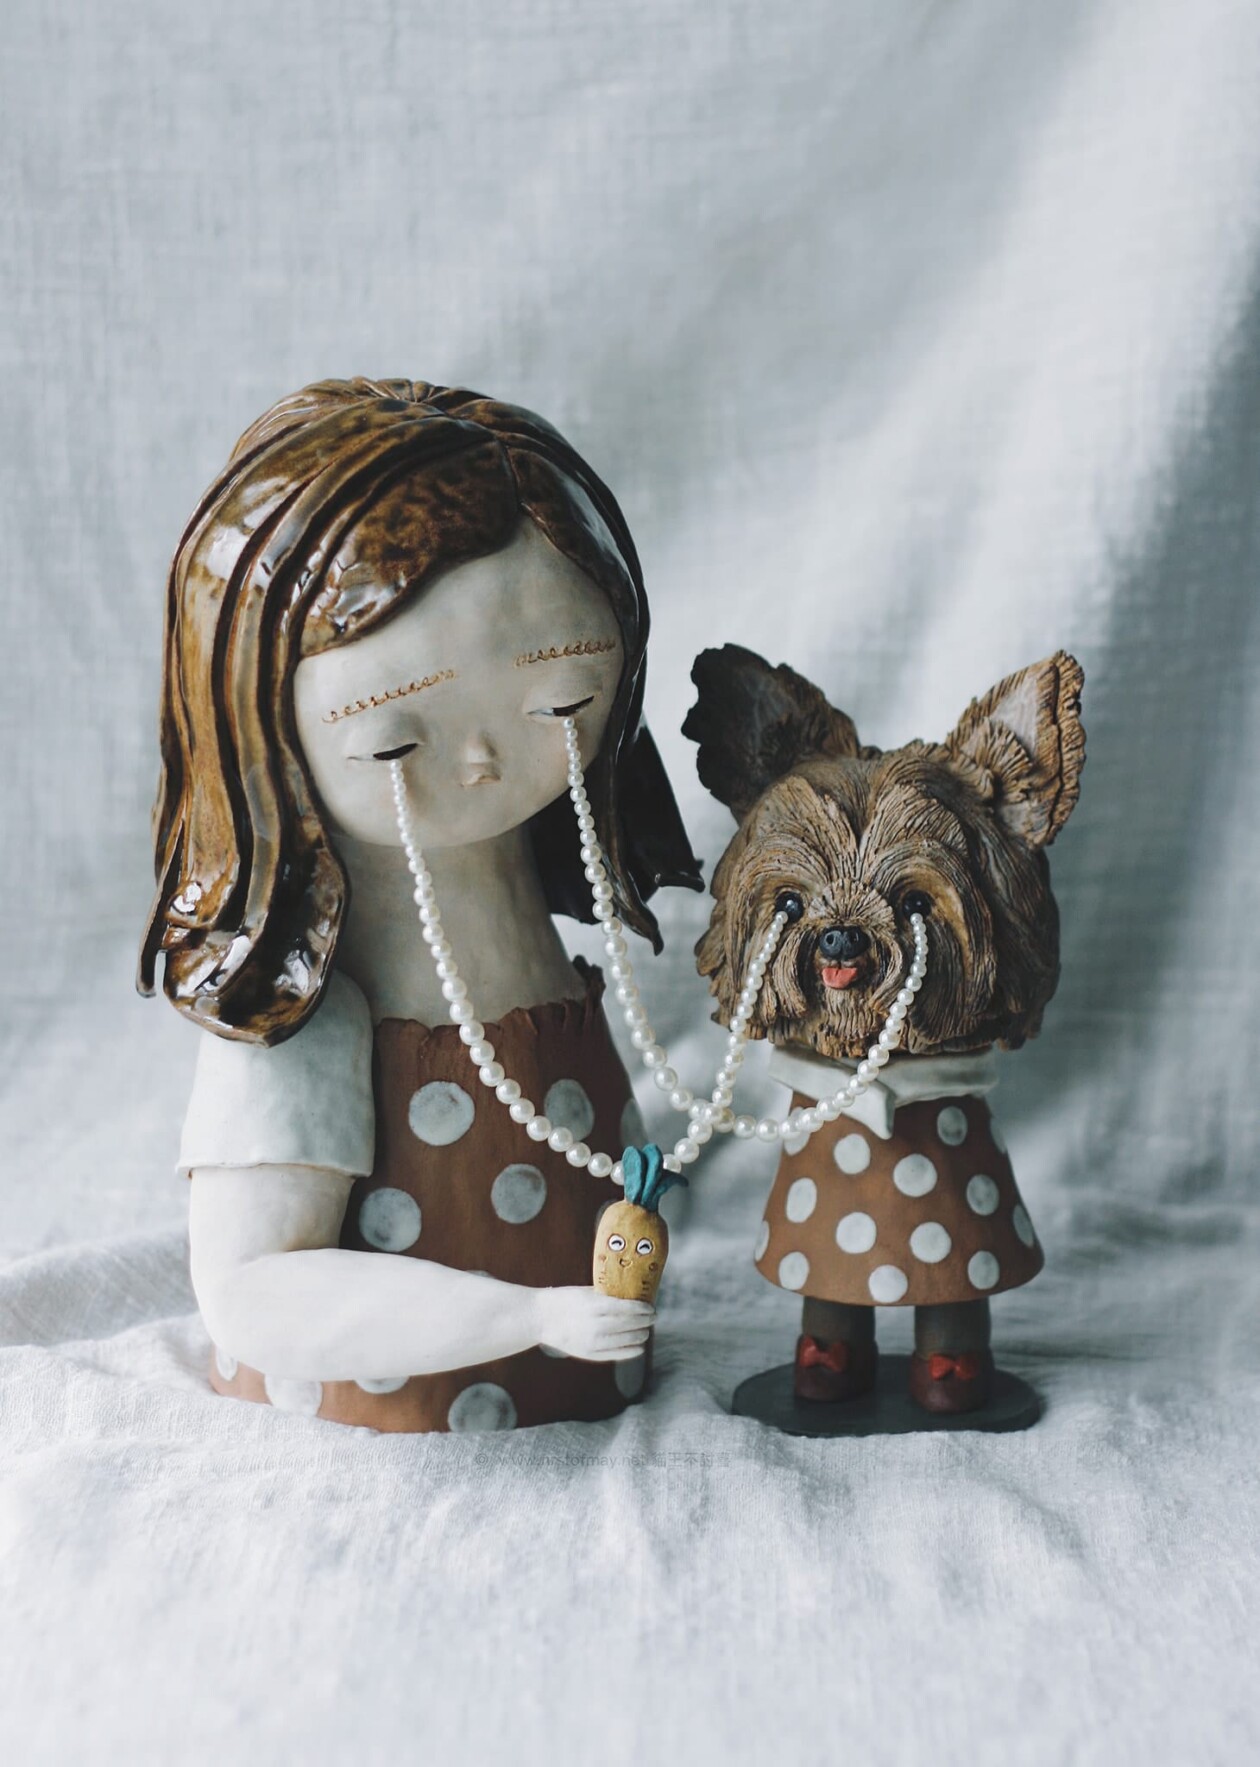 Delicate Ceramic Sculptures Of Figures Crying Pearls By First Of May Studio (2)